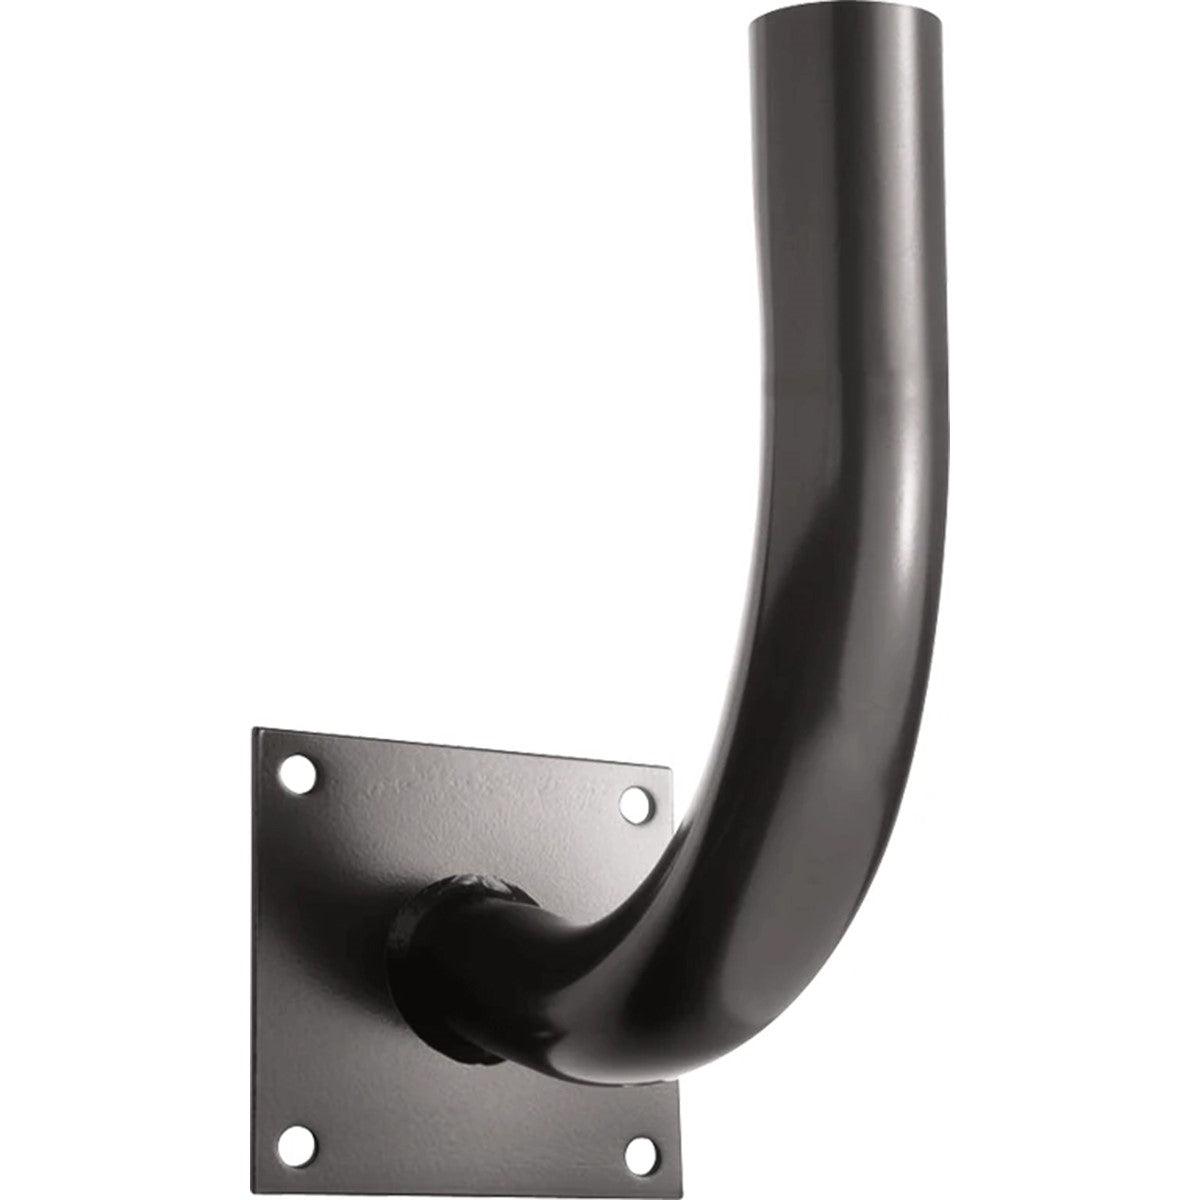 RAB Lighting MCB Poles Bracket Curved Wall Mount 12 Inches X 13 Inches, Bronze Finish - Bees Lighting